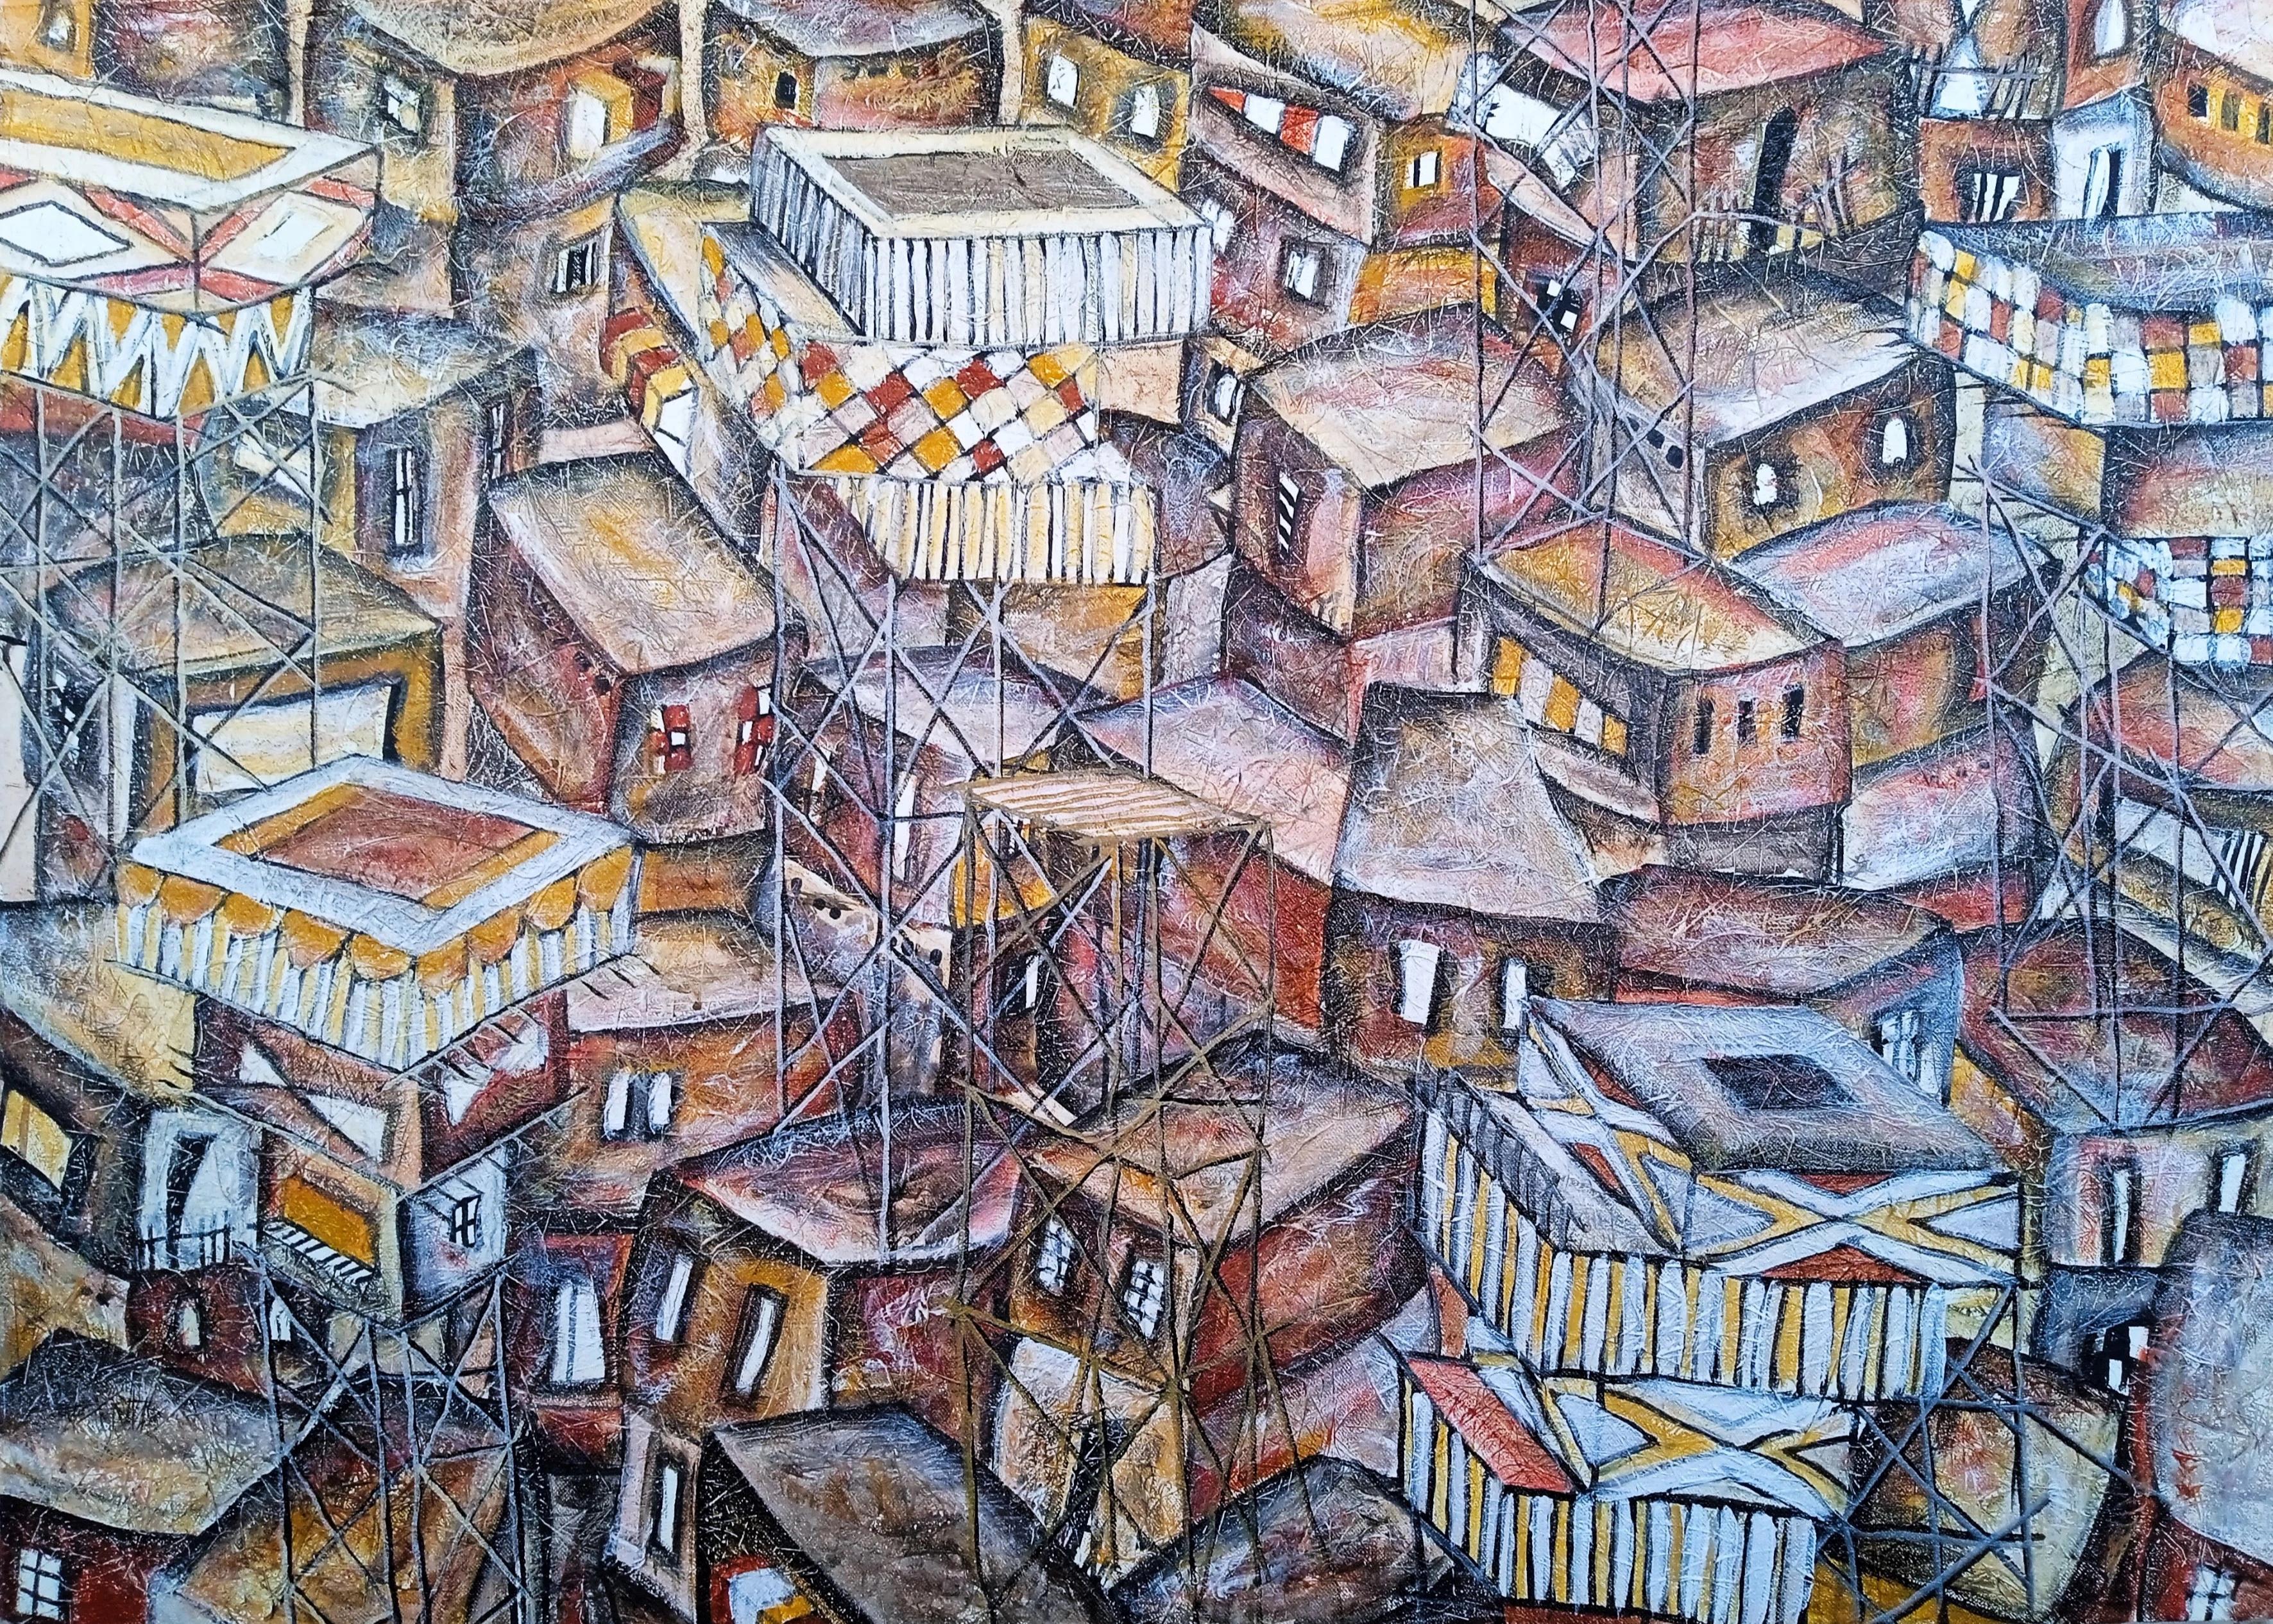 "Above the City II" Painting 33" x 47" inch by Mohamed Hussein